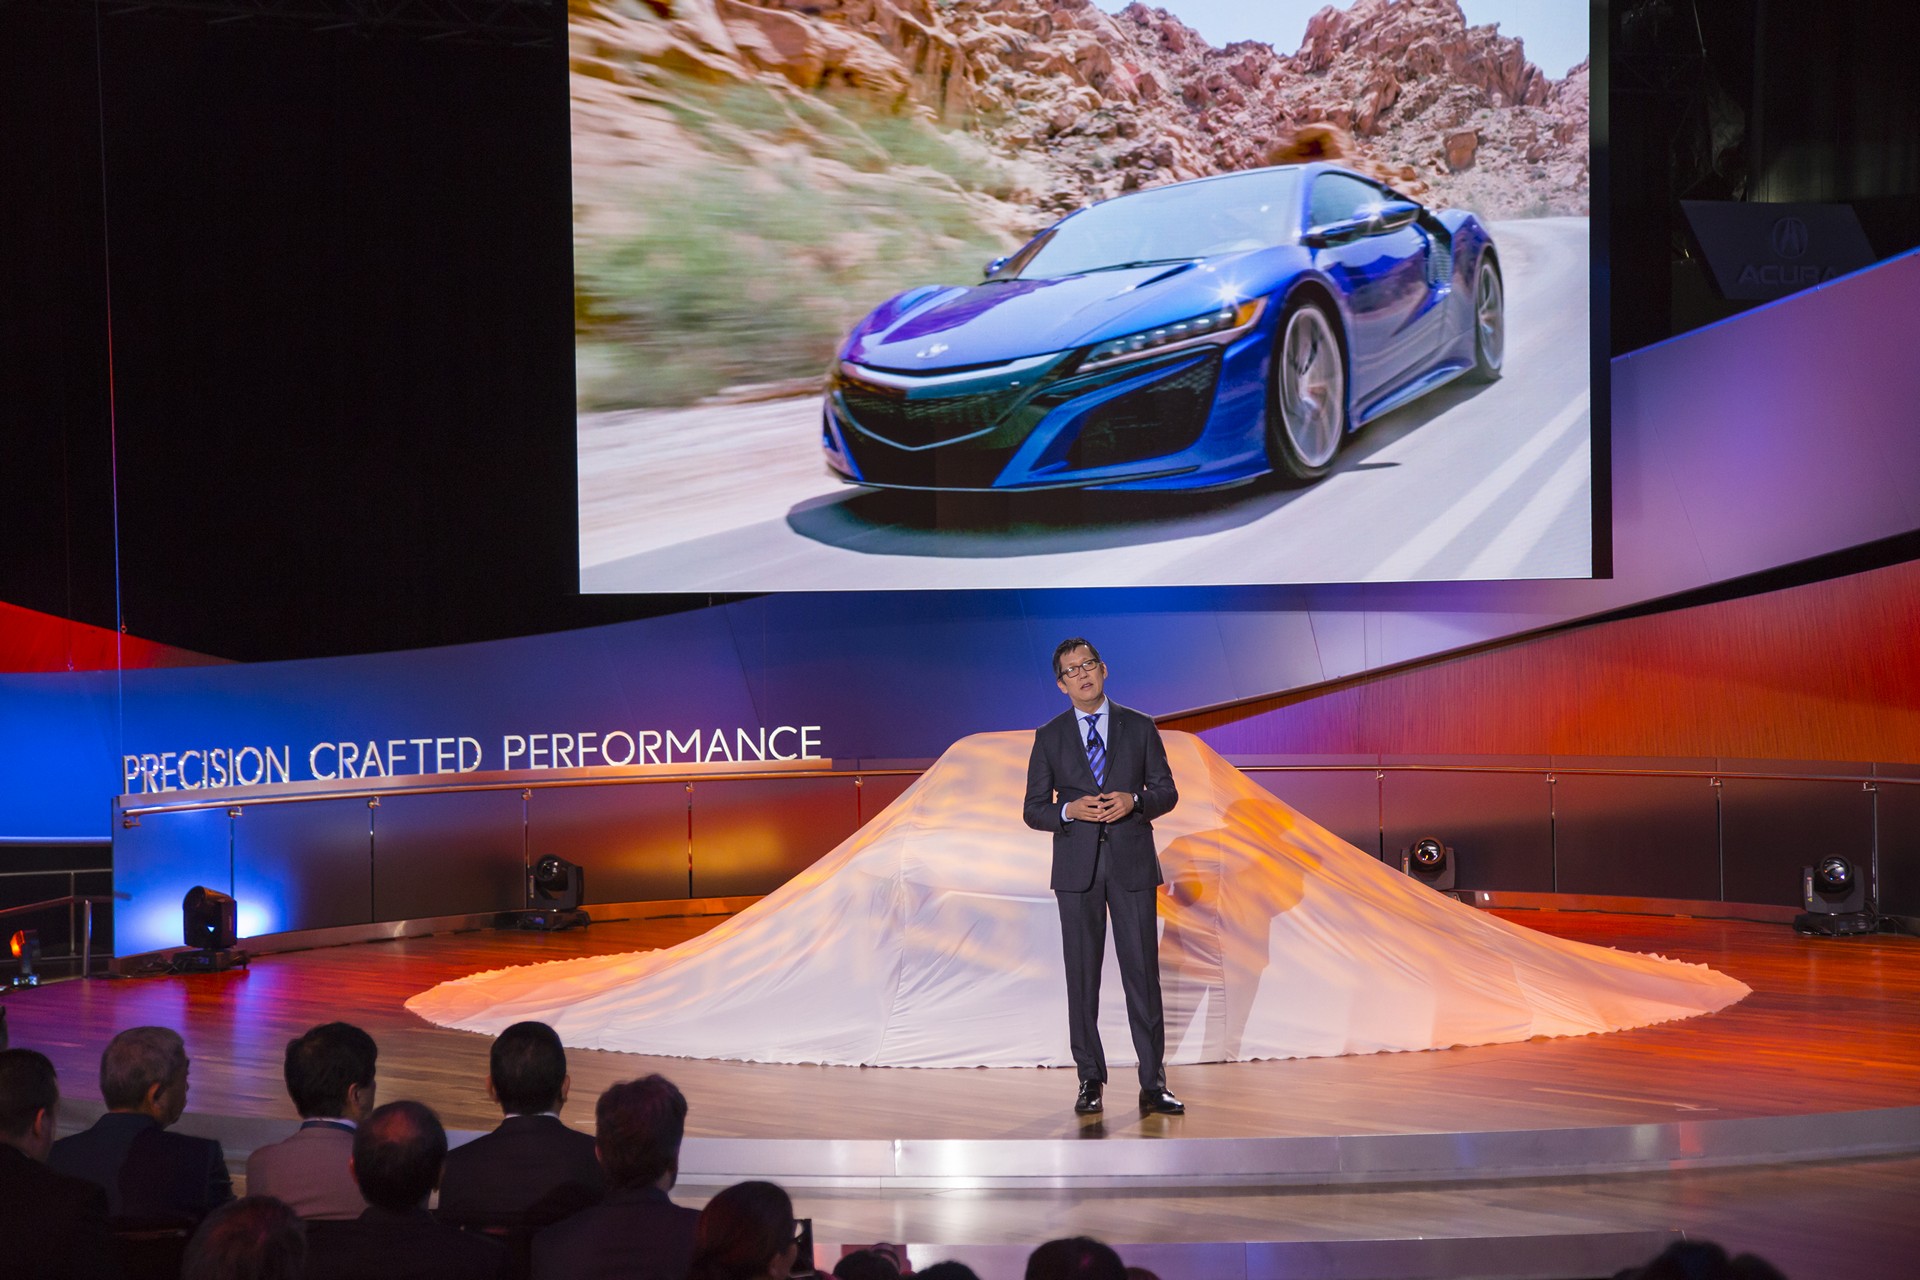 Jon Ikeda, Vice President and General Manager, Acura Division, at the 2016 North American International Auto Show unveiling of the Acura Precision Concept in Detroit © Honda Motor Co. Ltd.